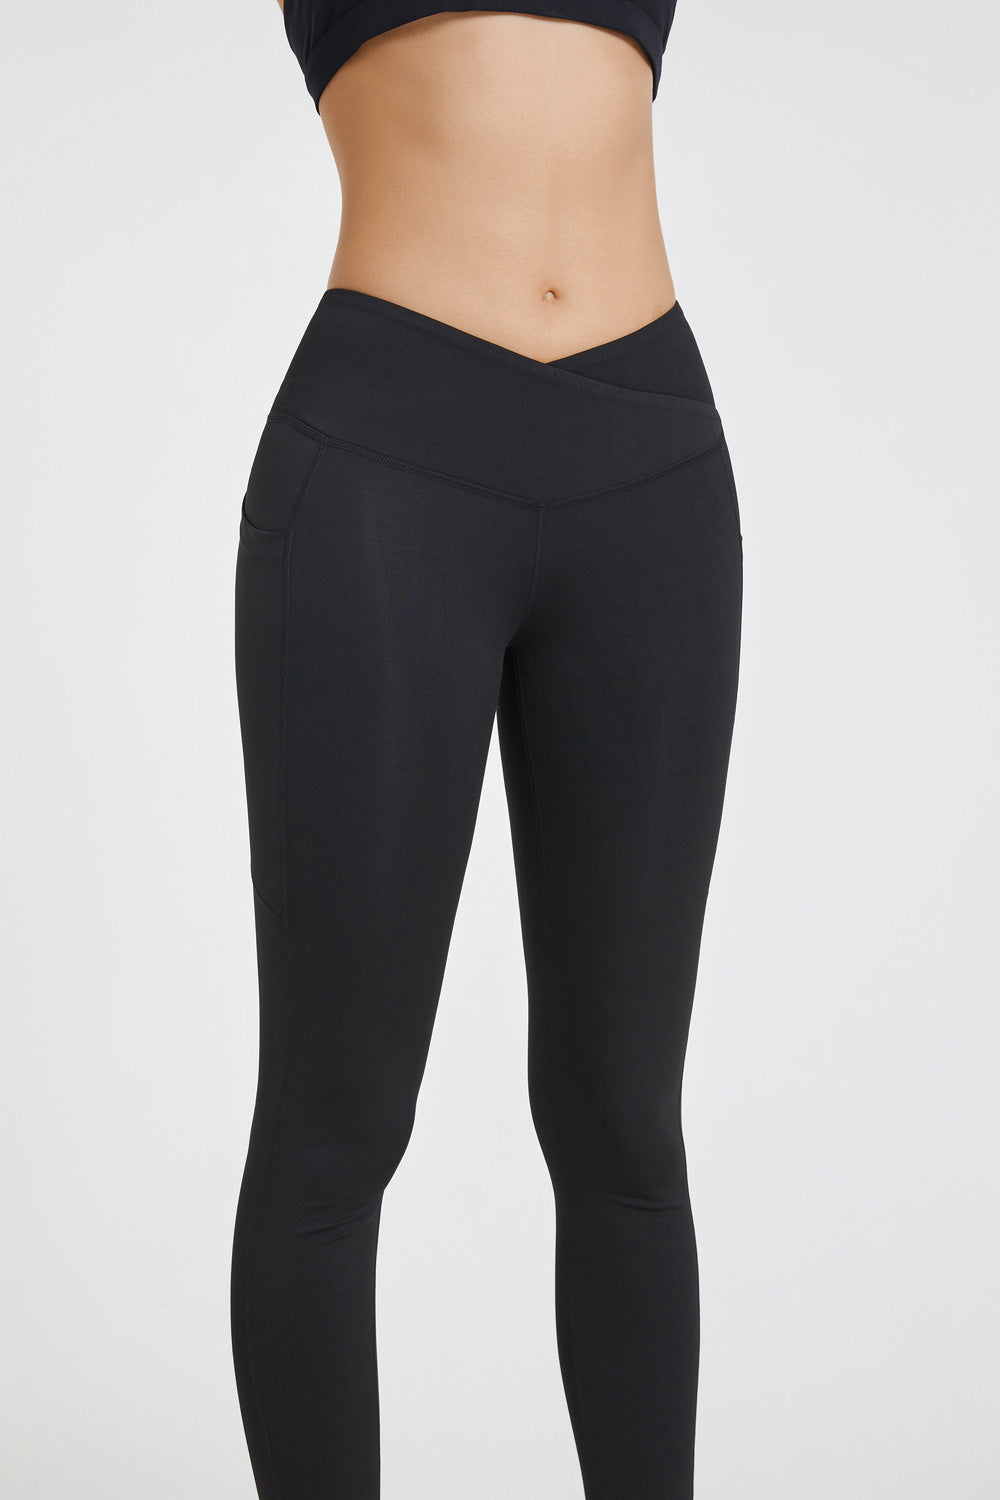 Crossover Athletic Legging, Olive - MECO7